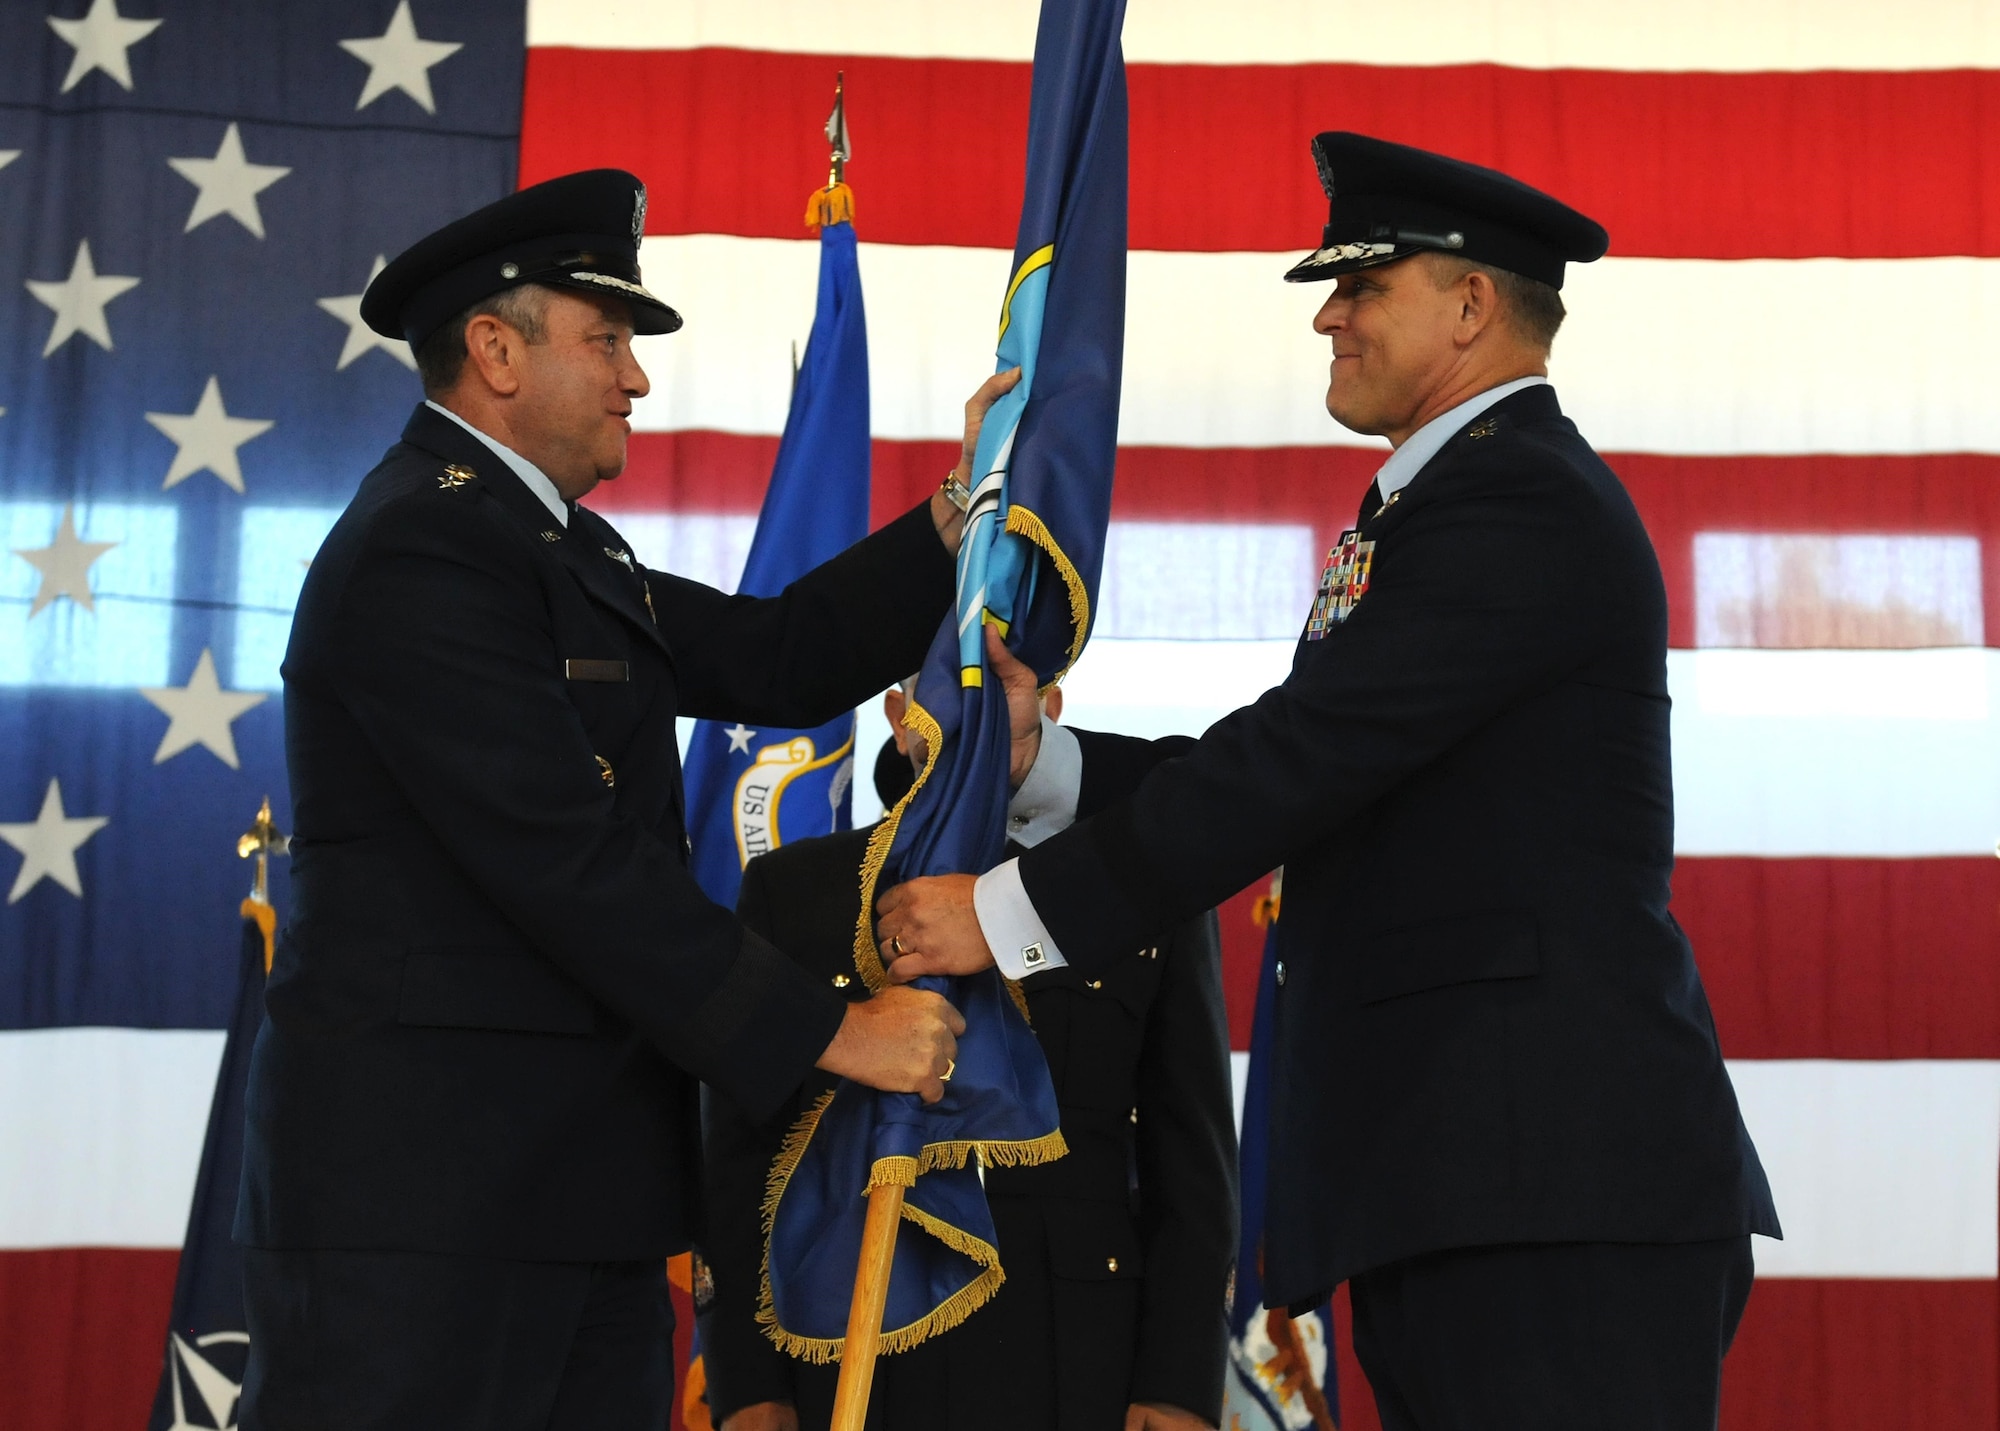 Gen. Philip M. Breedlove, U.S. European Command commander and NATO Supreme Allied Commander Europe (left), gives Gen. Frank Gorenc the command of Allied Air Command during an assumption of command ceremony at Ramstein Air Base, Germany, Aug. 2, 2013. (U.S. Air Force photo/Airman 1st Class Holly Mansfield)